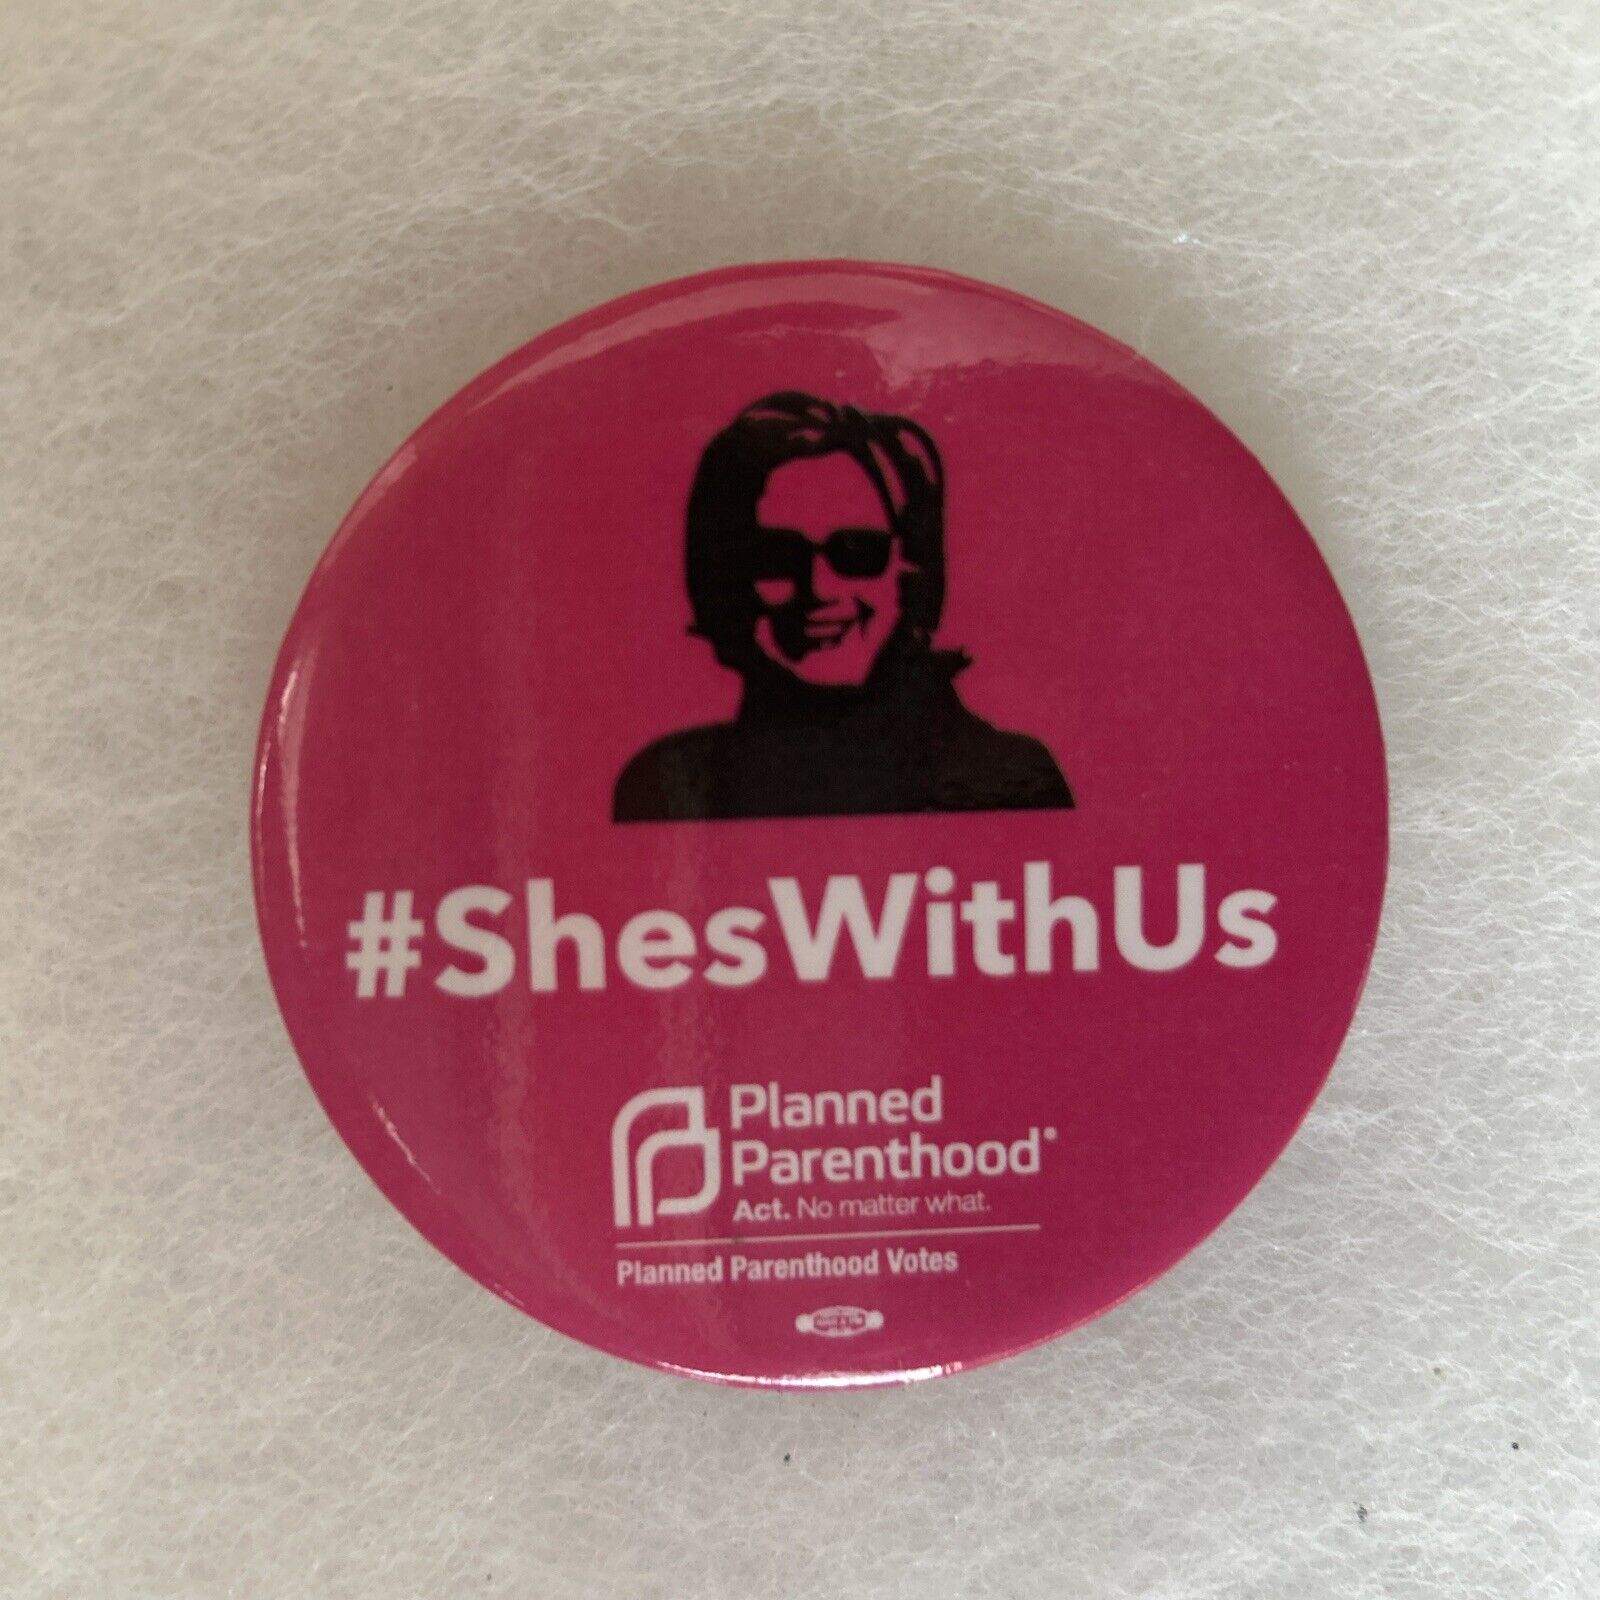 Hillary Clinton ShesWithUs Planned Parenthood  2 1/2” pinback button pin